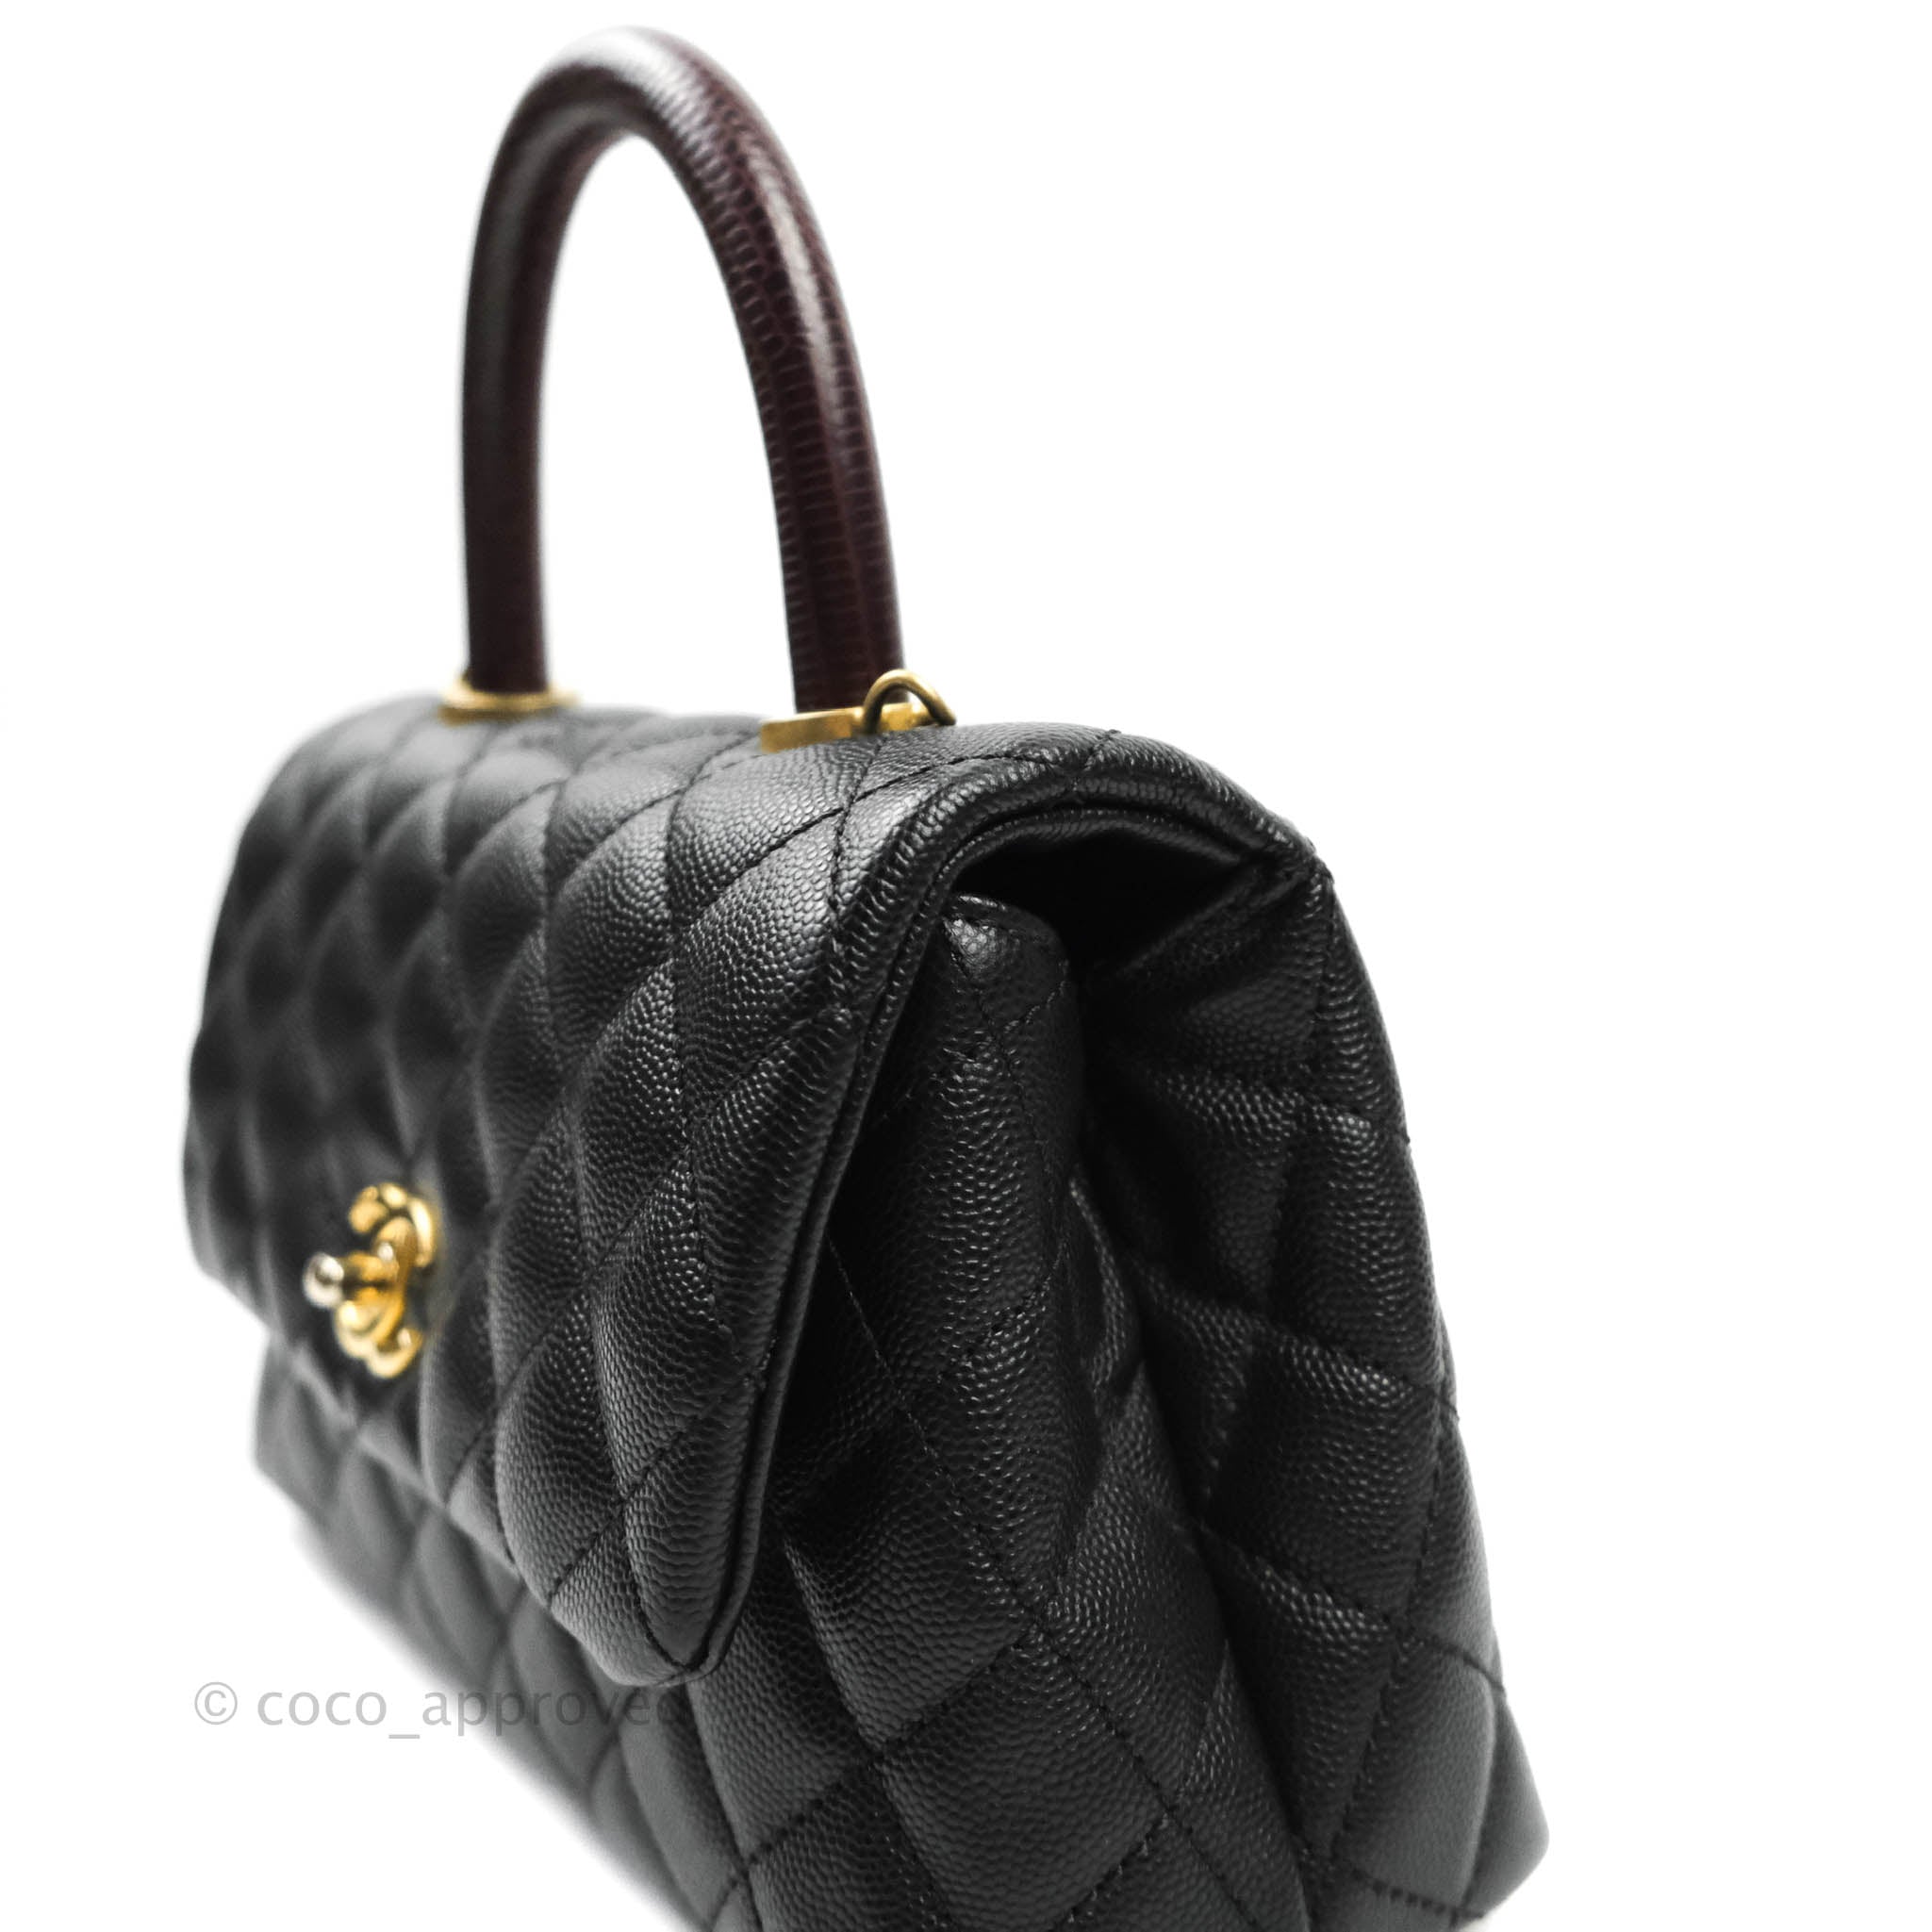 Chanel Gold Quilted Caviar Leather Small Coco Top Handle Bag